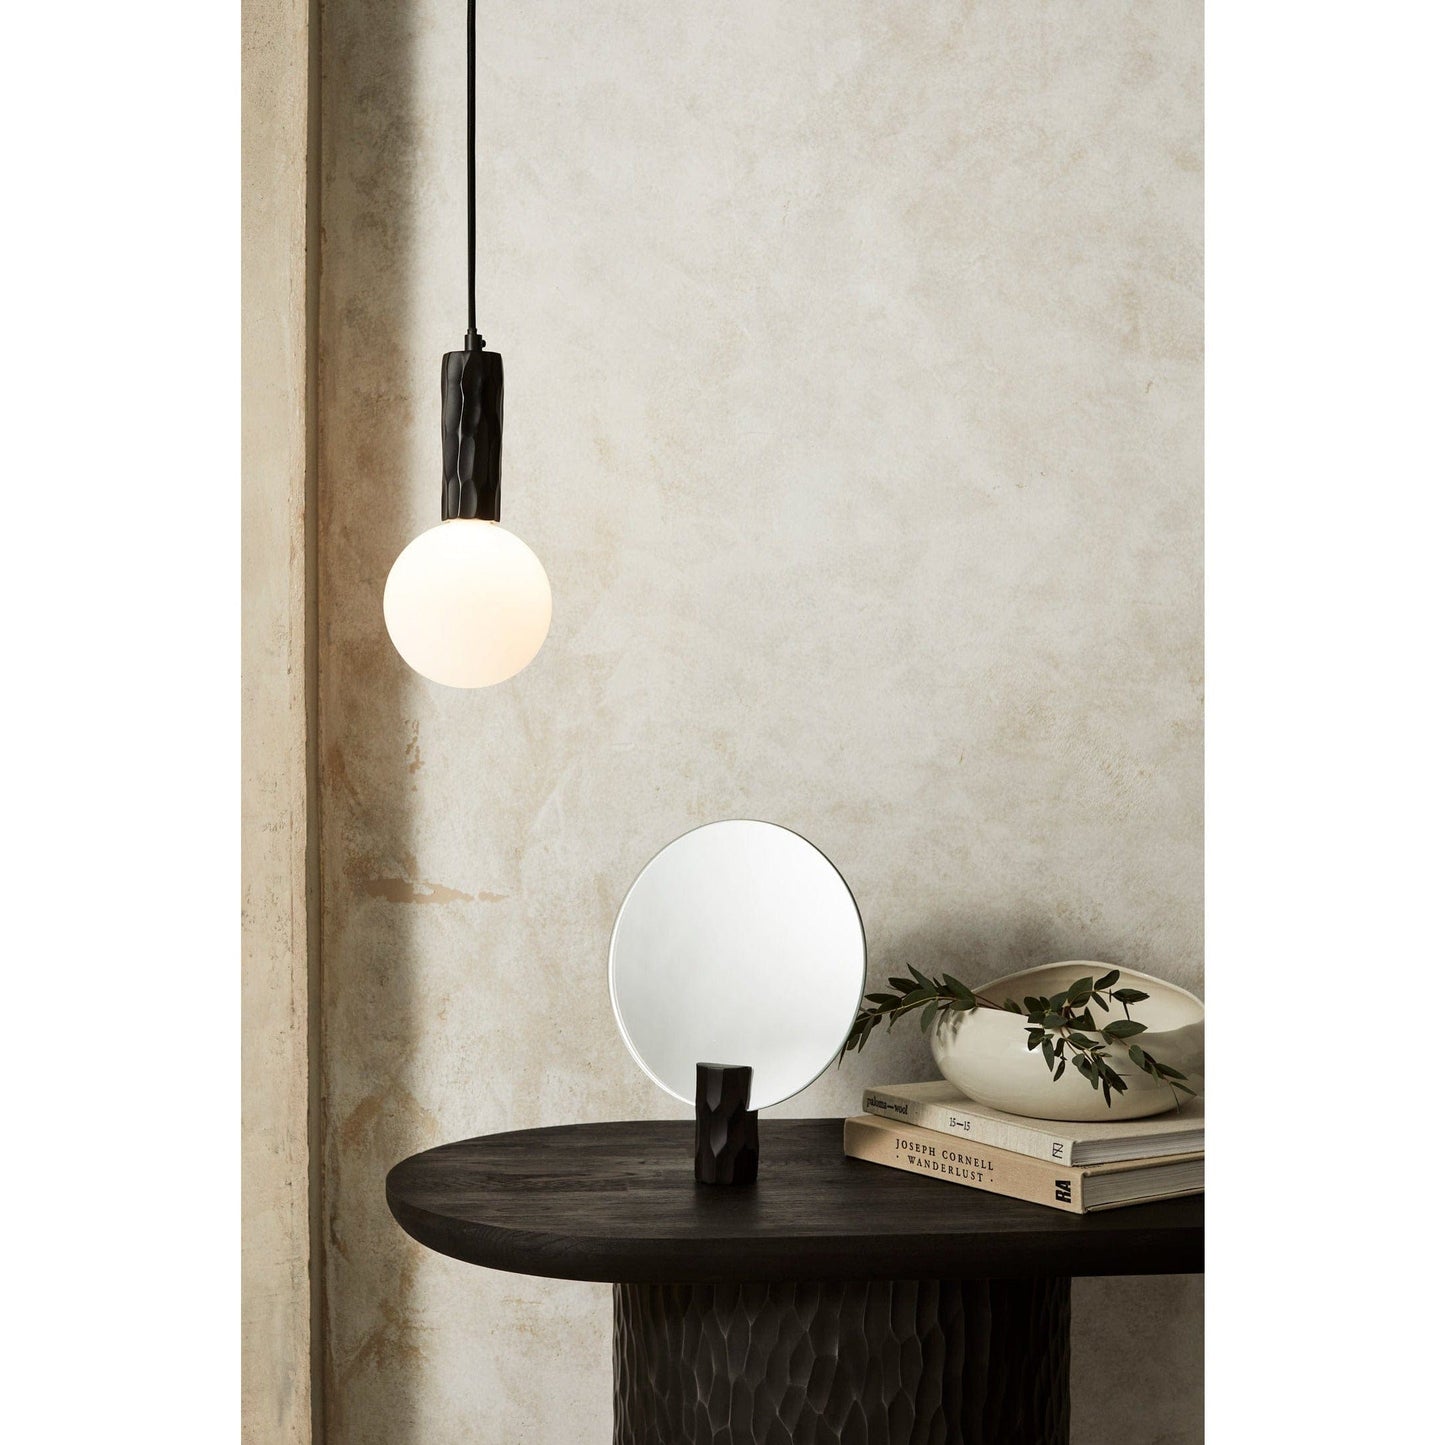 Alex Price Pendant lights White Glass KYOTO Pendant Light Black with White, Smoked or Clear Glass